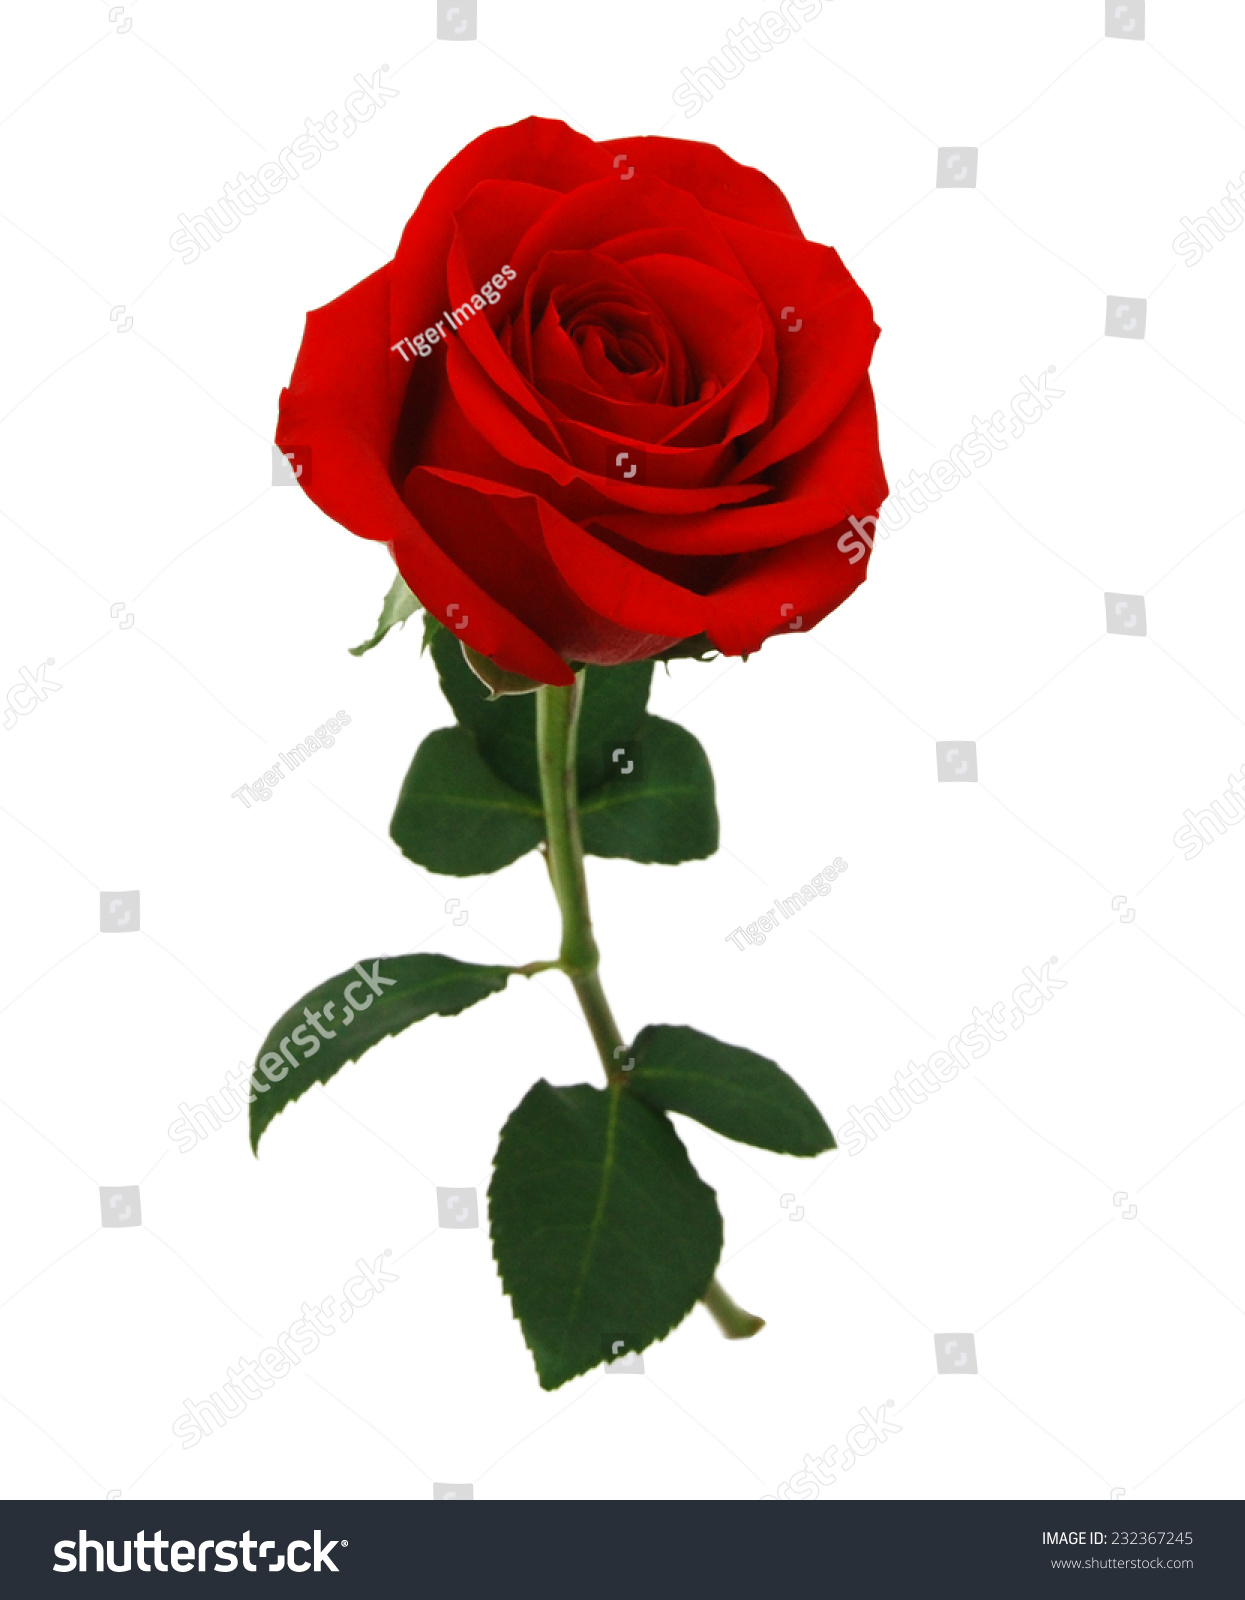 Red rose isolated on white background  #232367245